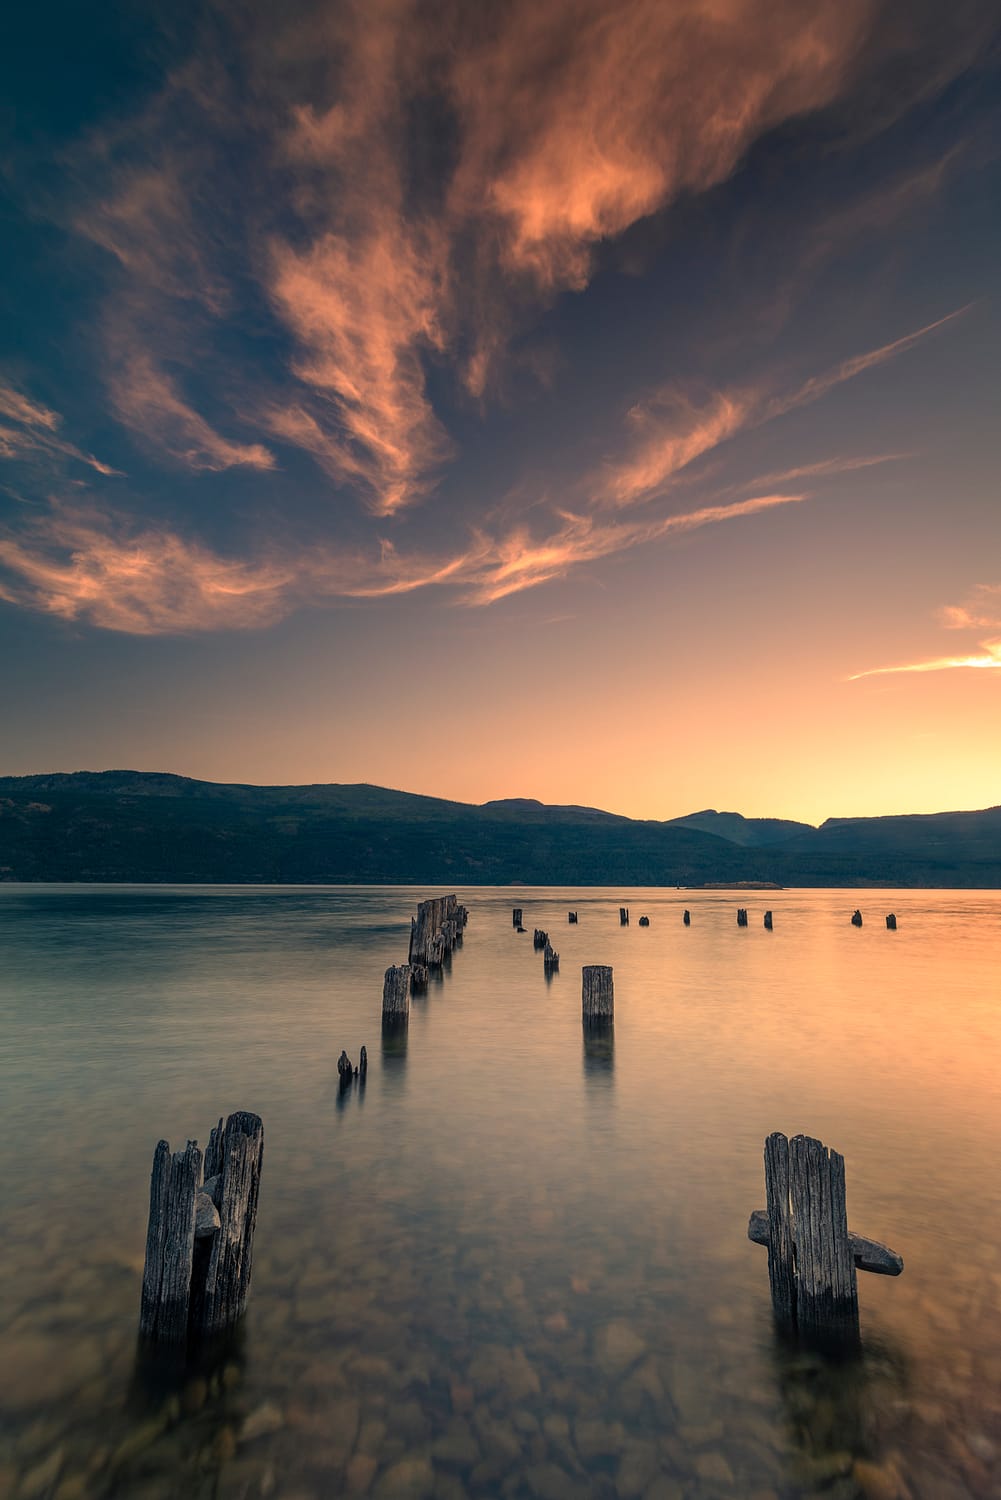 a sunrise over a body of water with rocks and abandoned dock in the foreground